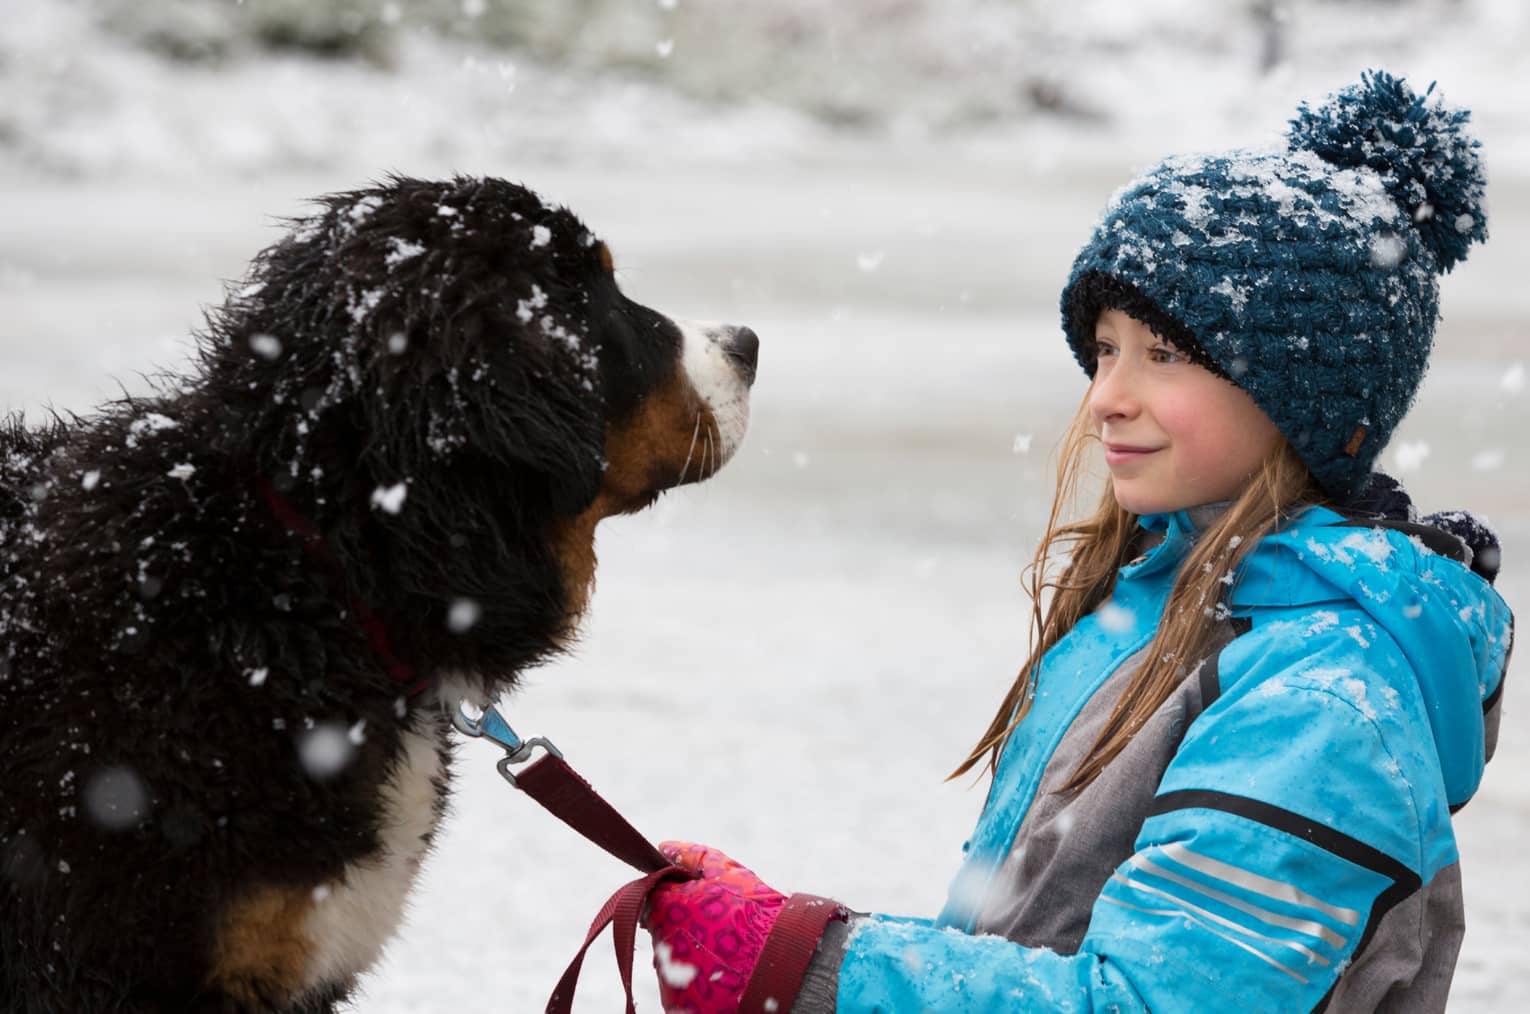 Young girl with knit hat holds leash of large dog as snow falls